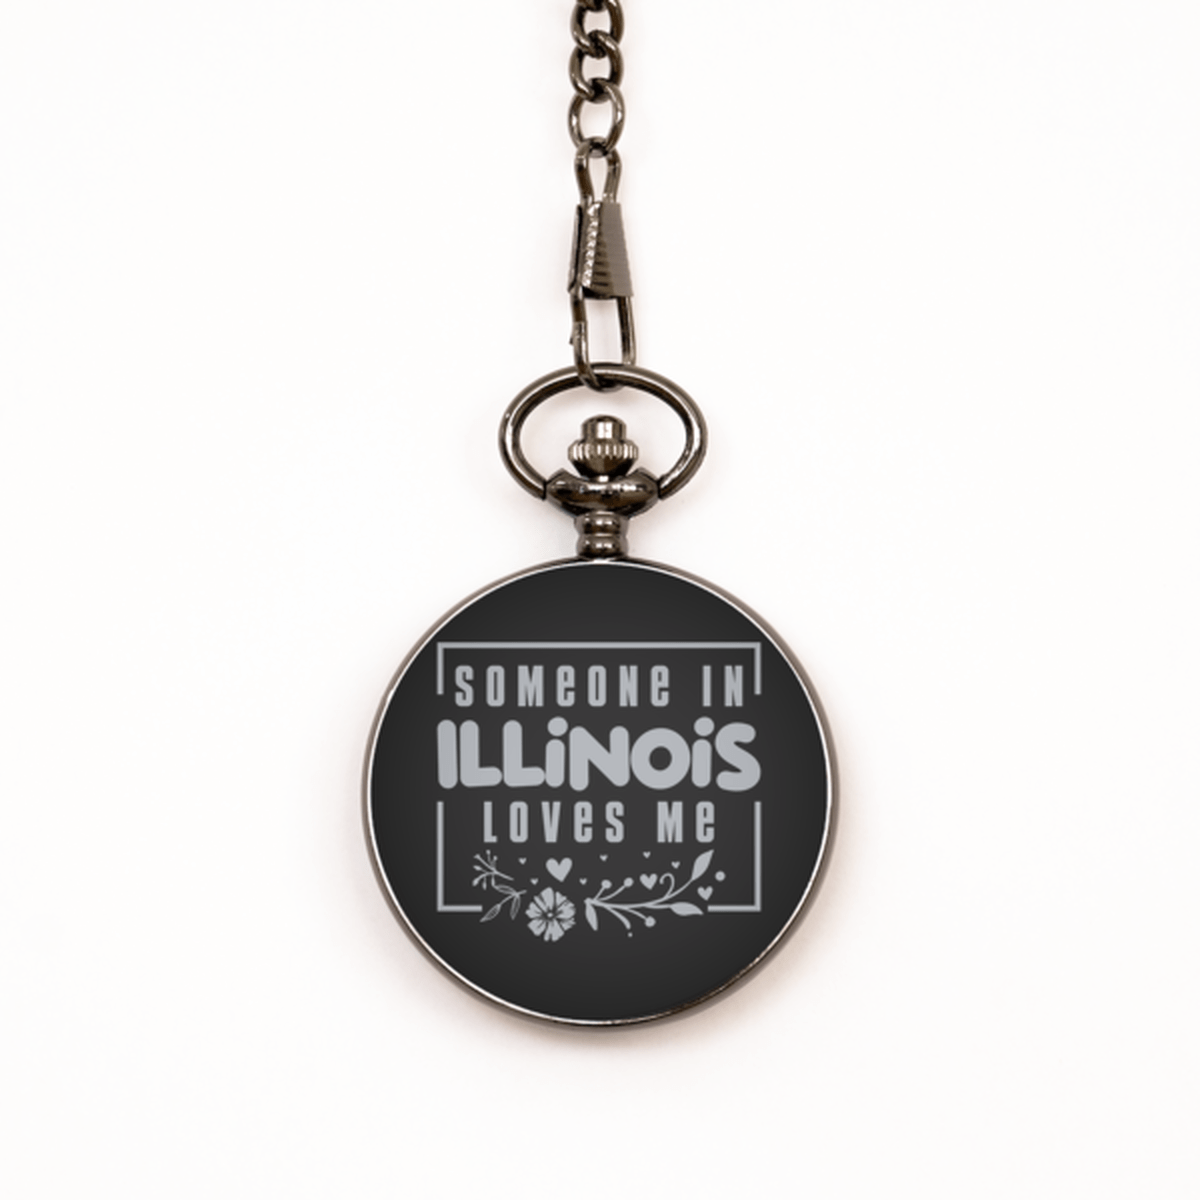 Cute Illinois Black Pocket Watch, Someone in Illinois Loves Me, Best Birthday Gifts from Illinois Friends & Family